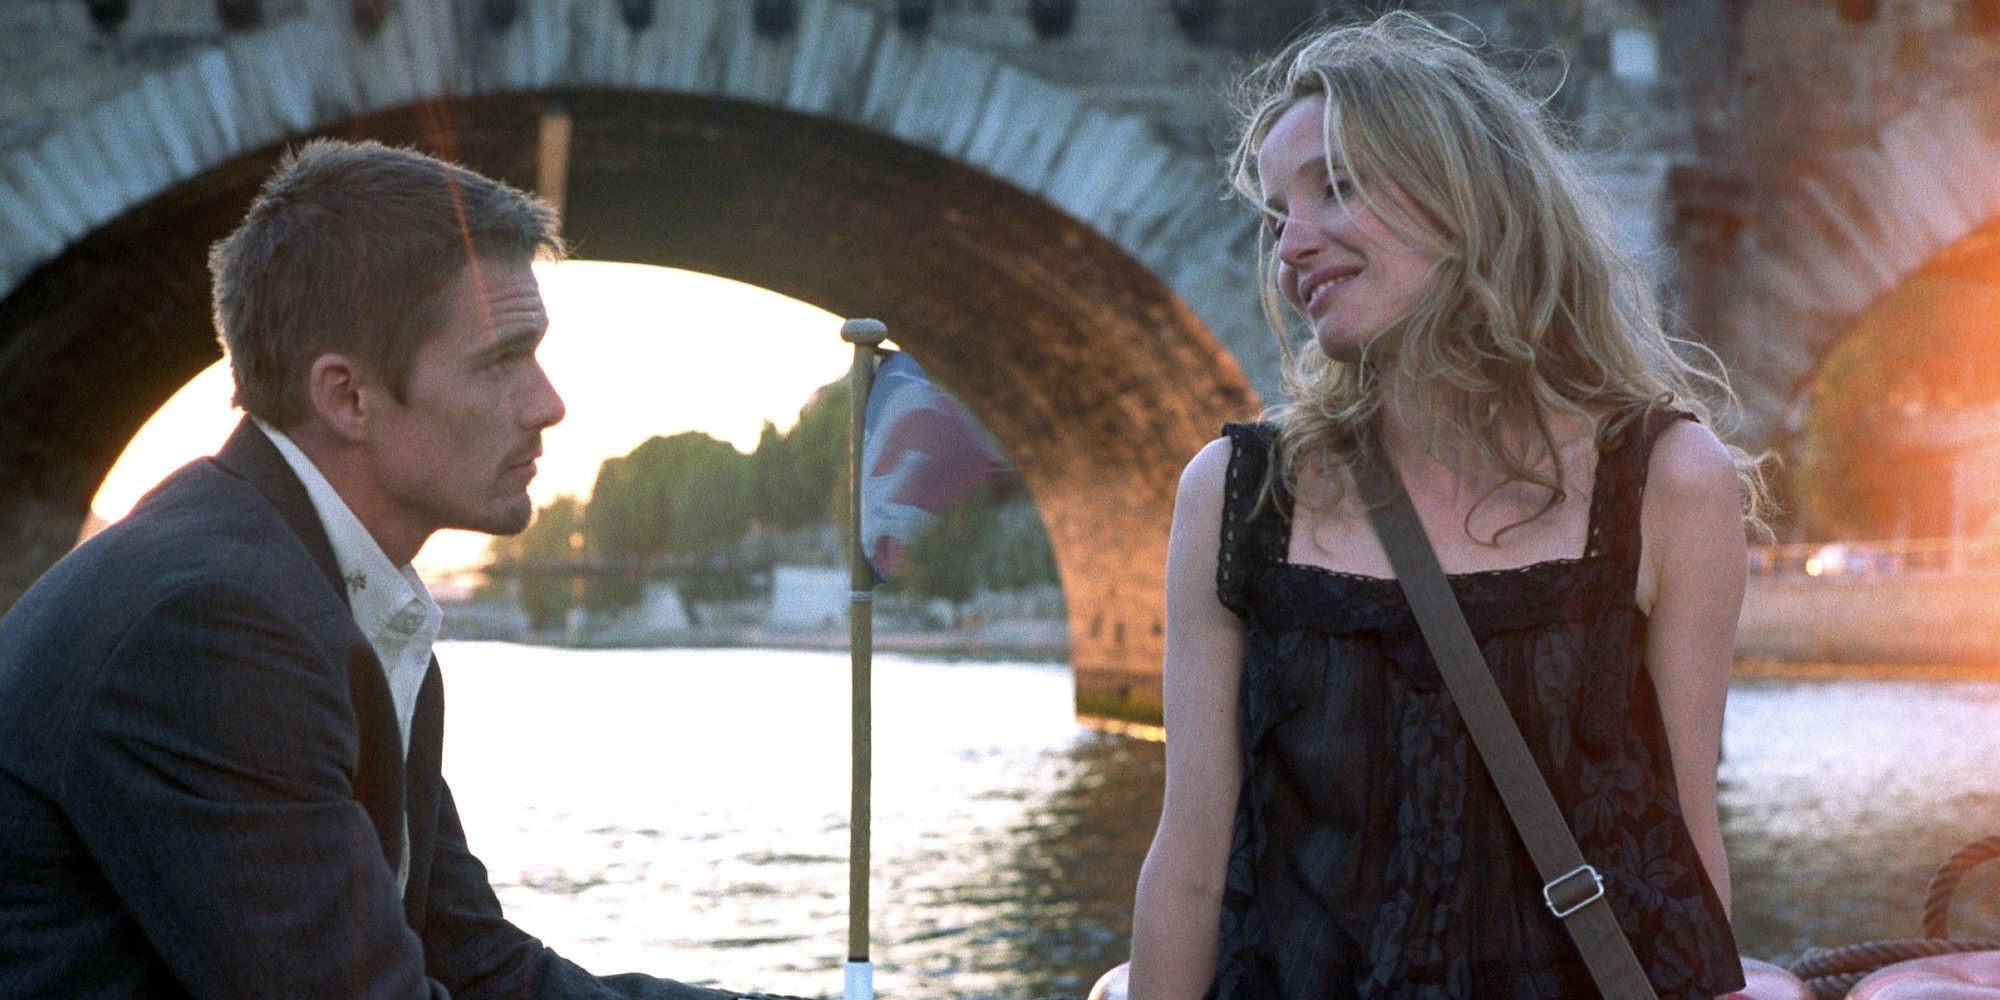 Ethan Hawke and Julie Delpy in 'Before Sunset'